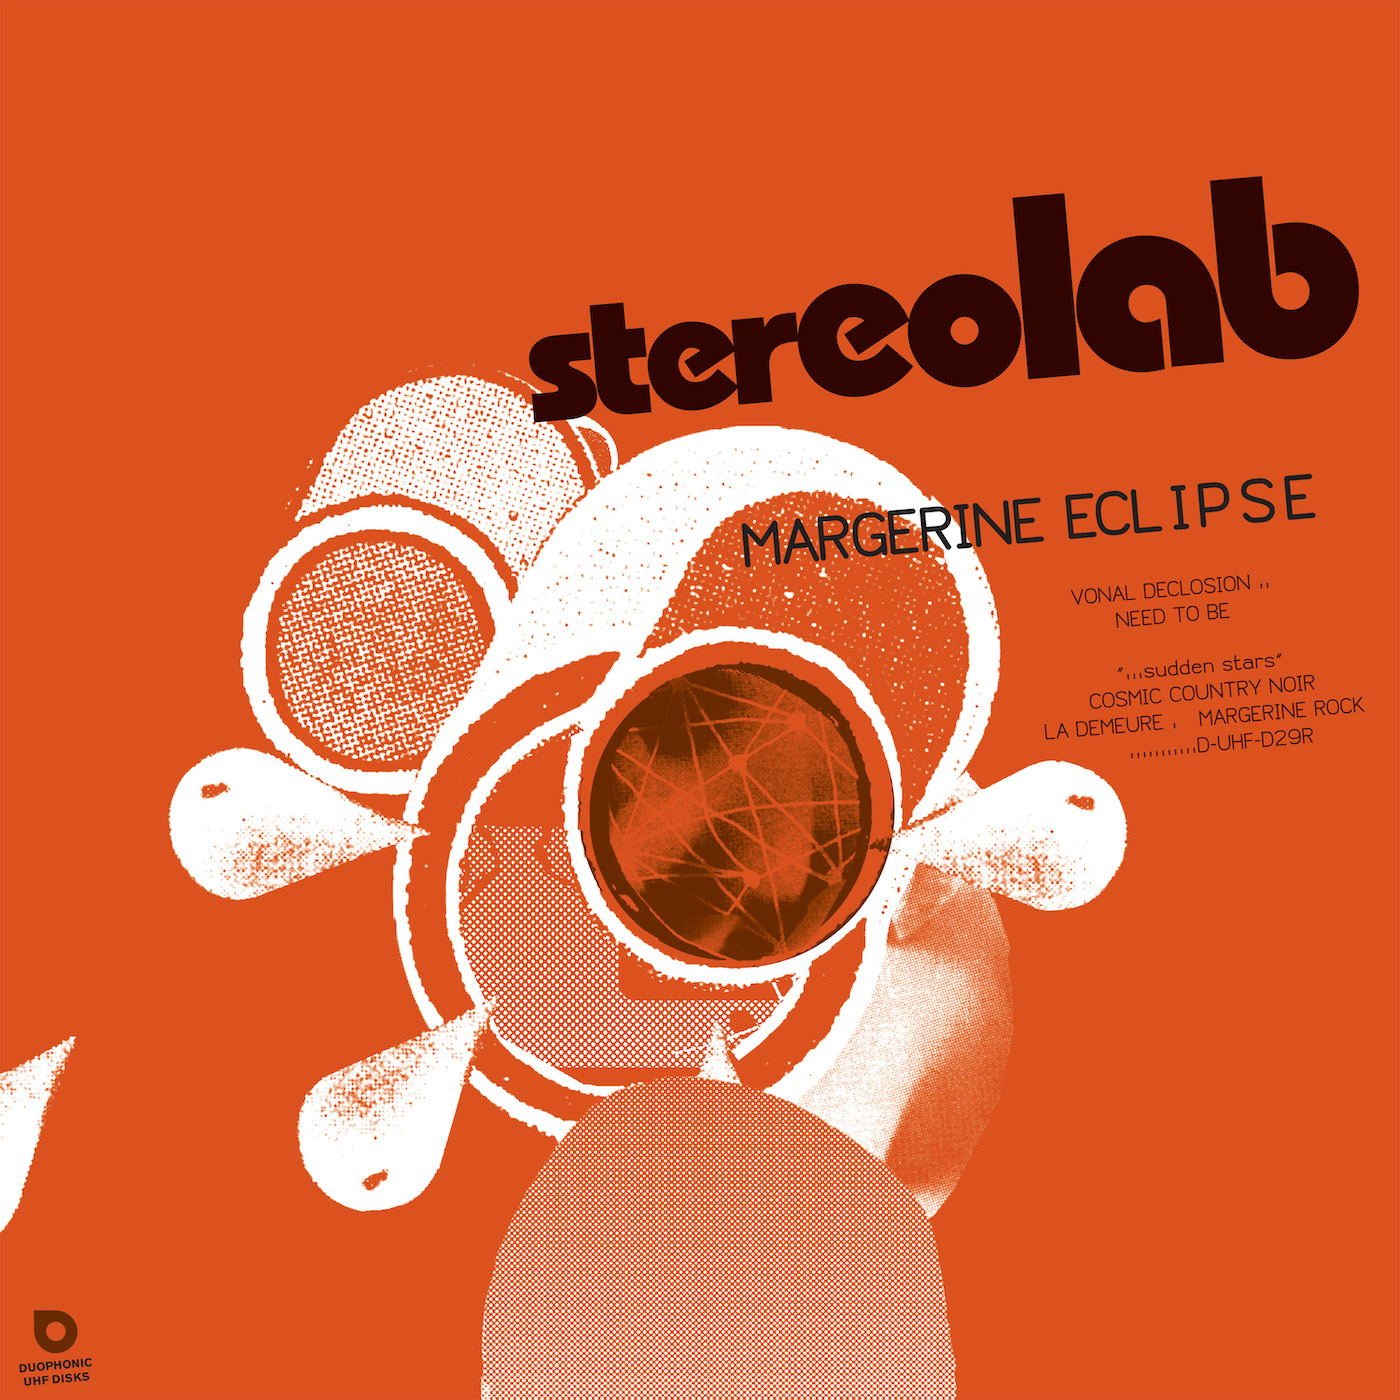 Stereolab - Margerine Eclipse (Expanded Edition) (2003/2019) [FLAC 24bit/96kHz]